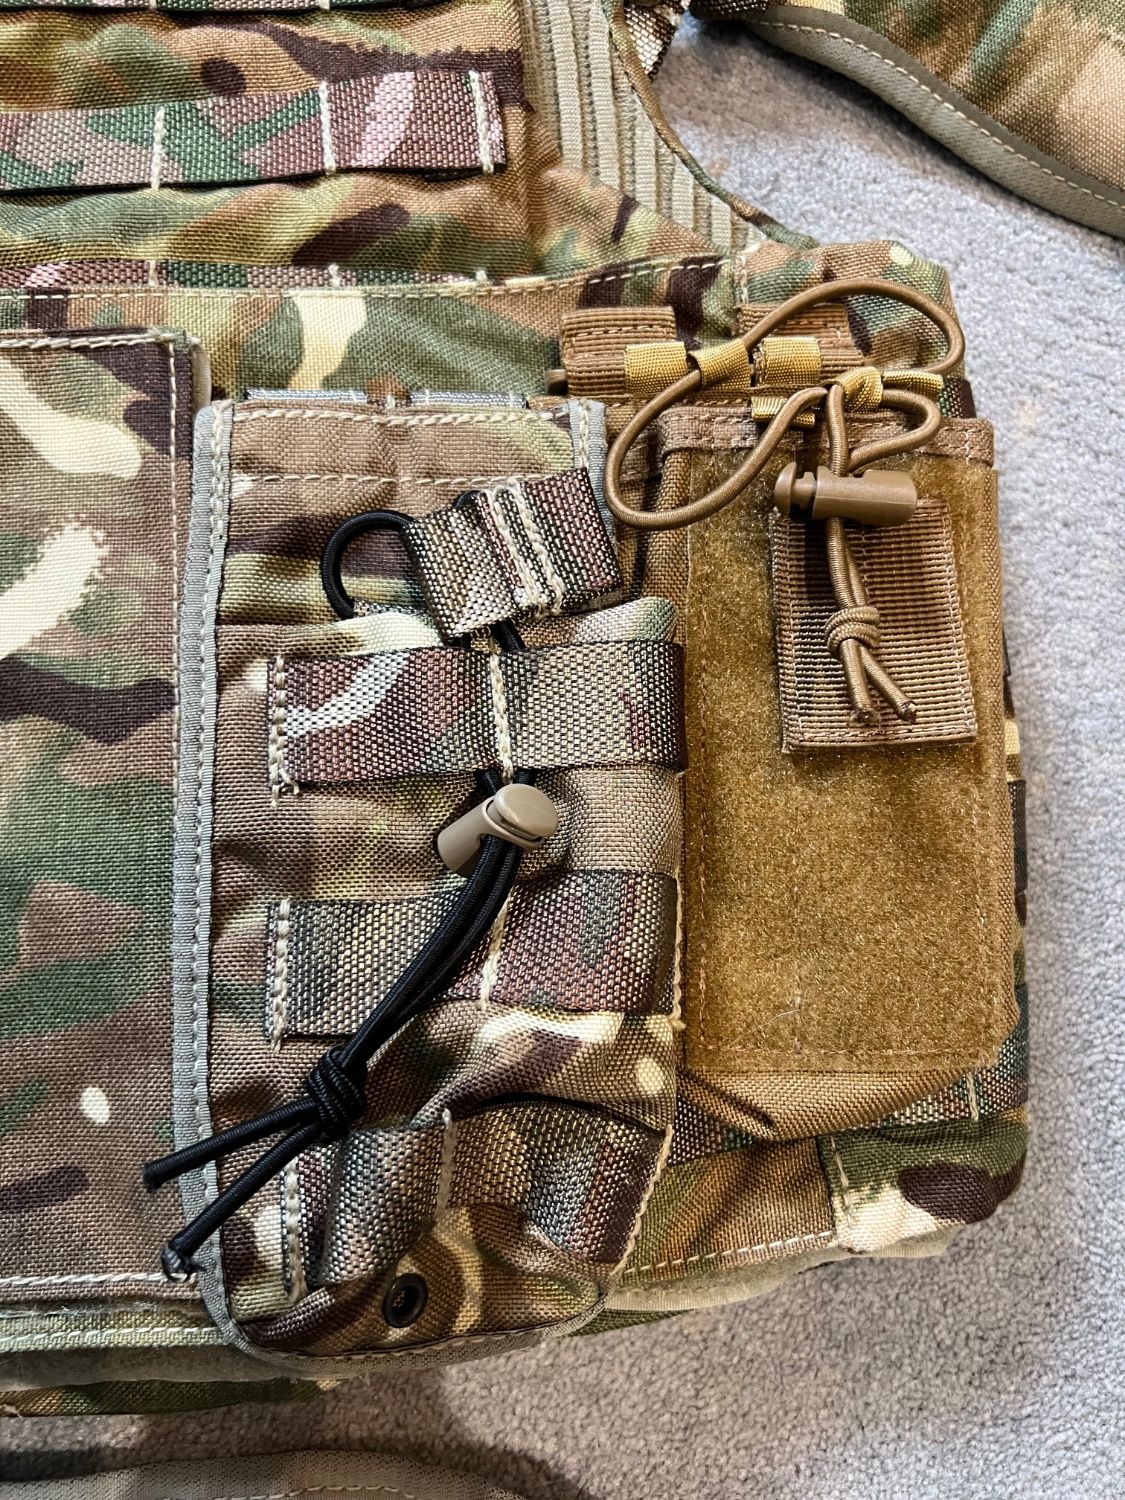 Osprey mkIV plate carrier - Gear - Airsoft Forums UK